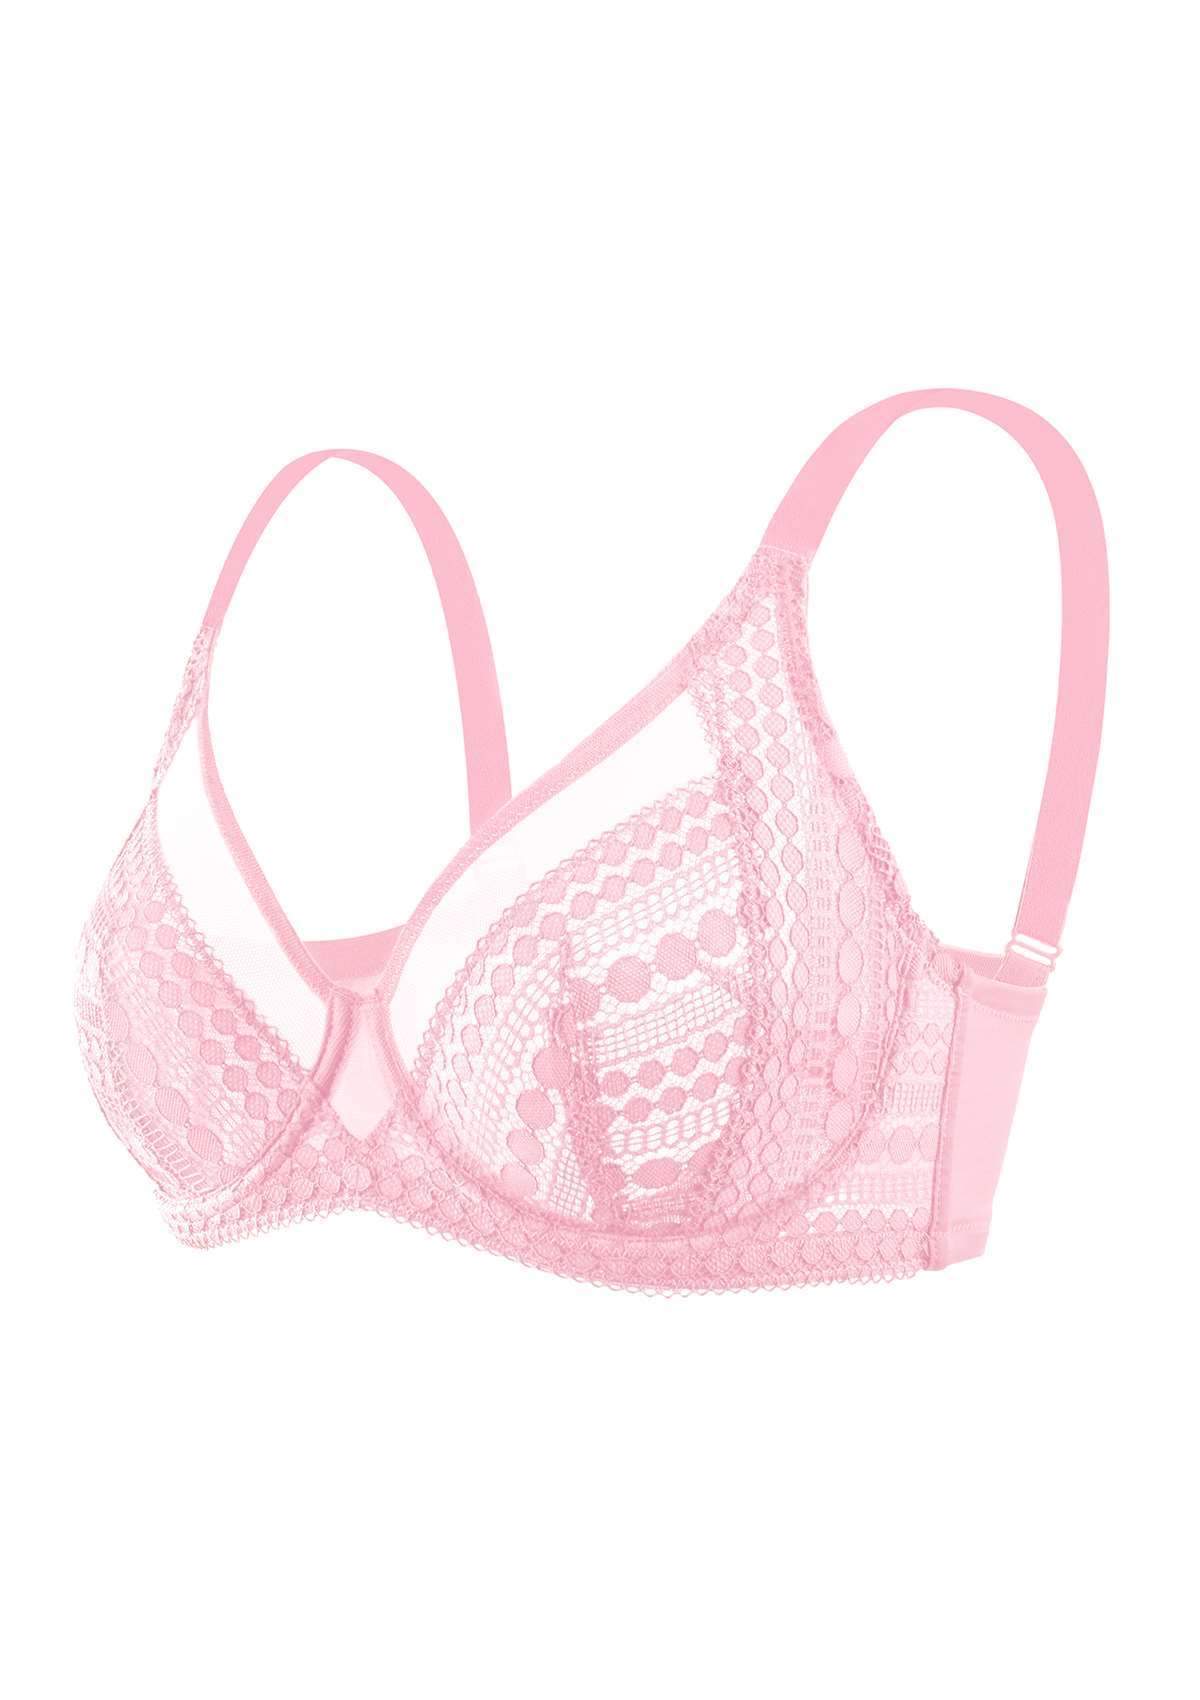 HSIA Heroine Lace Bra And Panties Set: Most Comfortable Supportive Bra - Pink / 36 / DDD/F